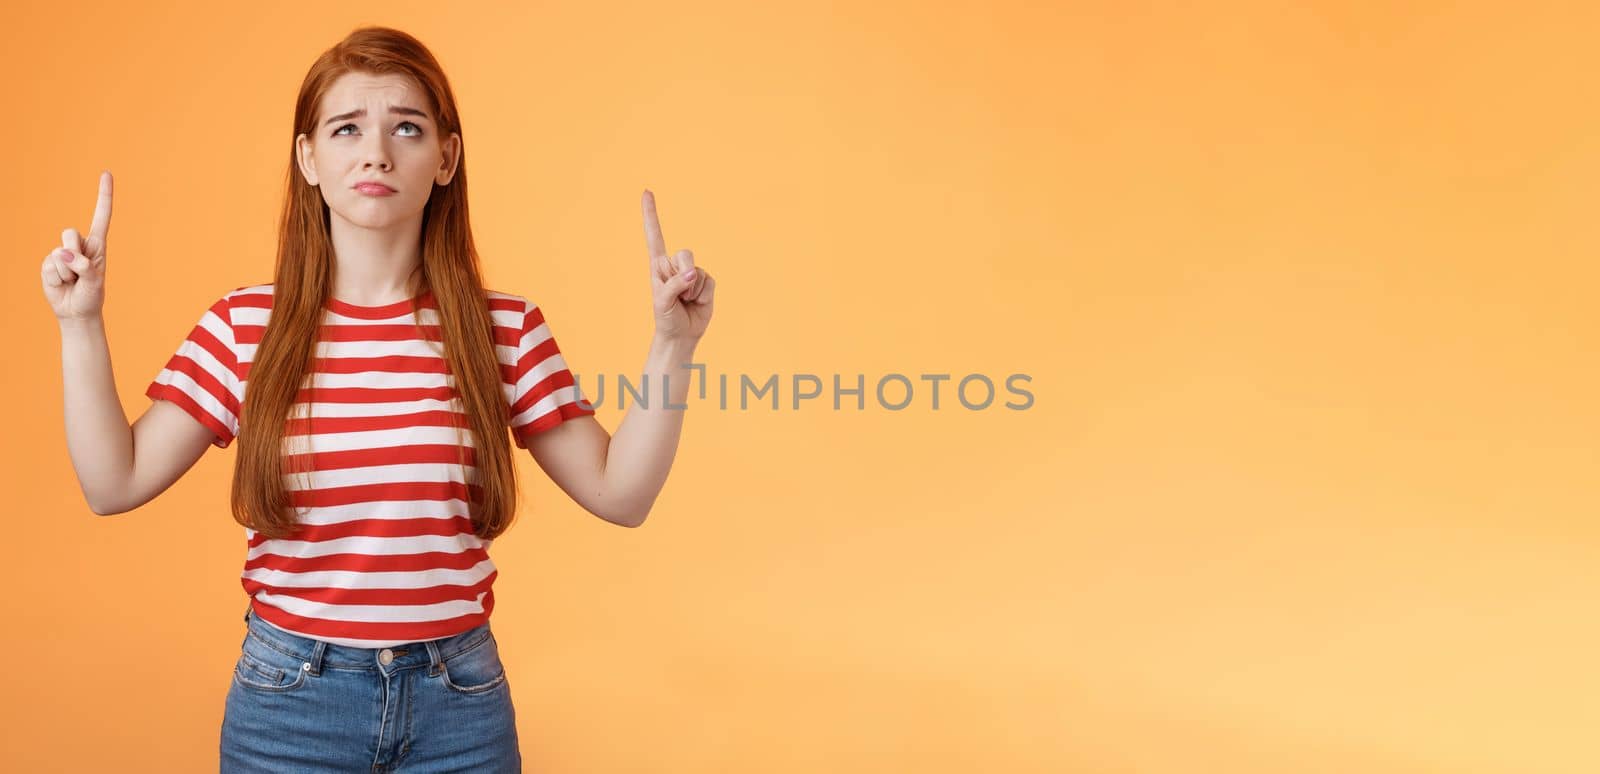 Hesitant upset cute redhead woman weighing choices look doubtful uncertain, frowning thoughtful, ponder decision, look pointing up unsure, have doubts, stand insecure orange background.